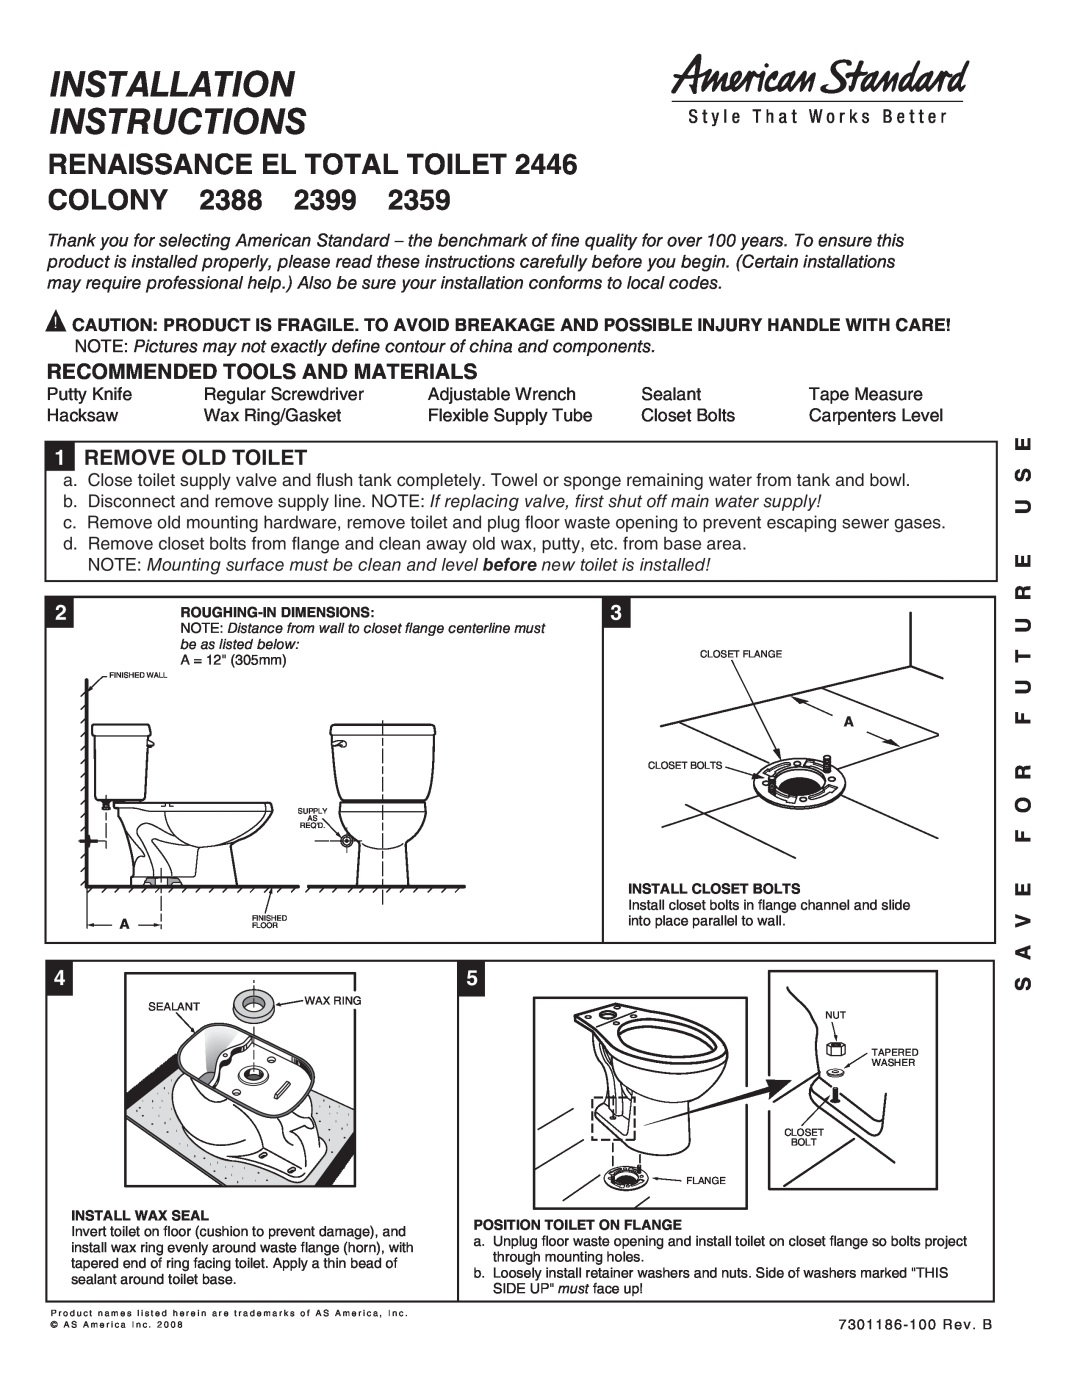 American Standard 2399, 2359, 2388 installation instructions Recommended Tools And Materials, 1REMOVE OLD TOILET 